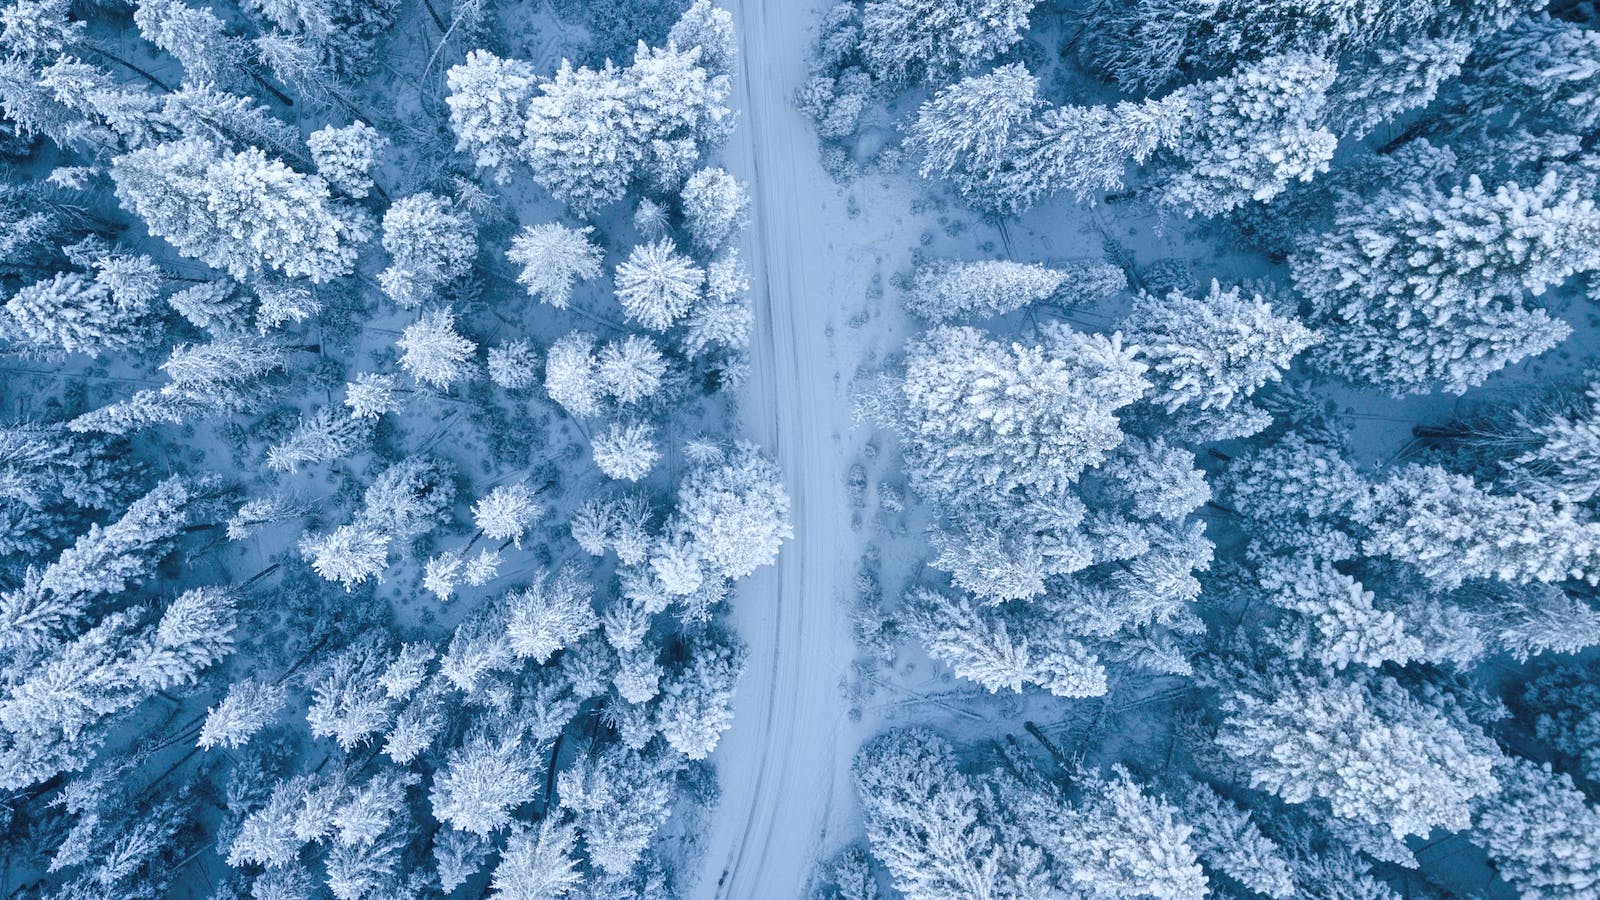 Overhead shot of trees and a road covered in snow